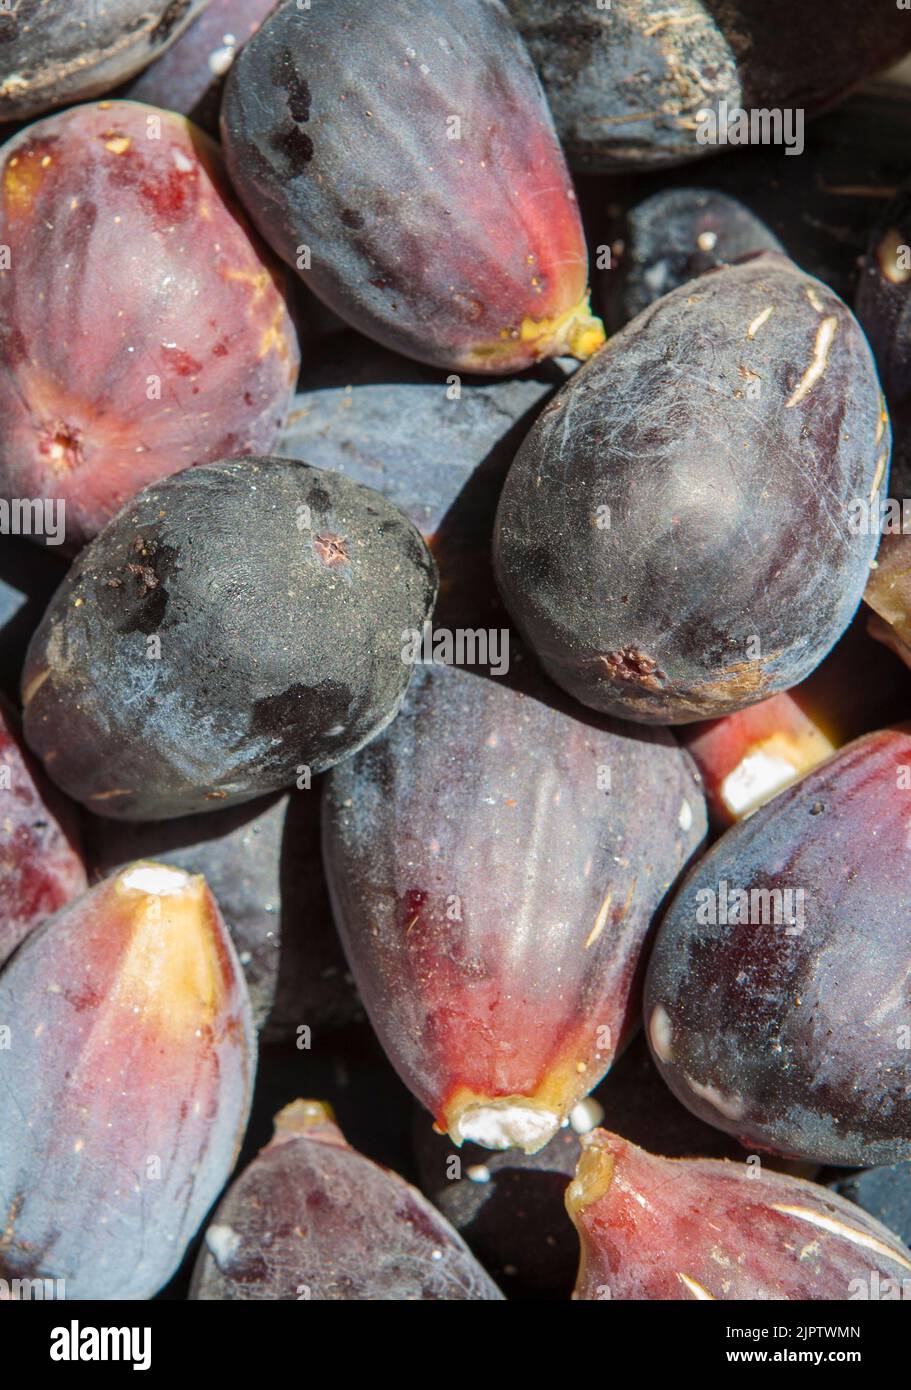 Fresh figs freshly picked from tree. Studio shot with natural light Stock Photo